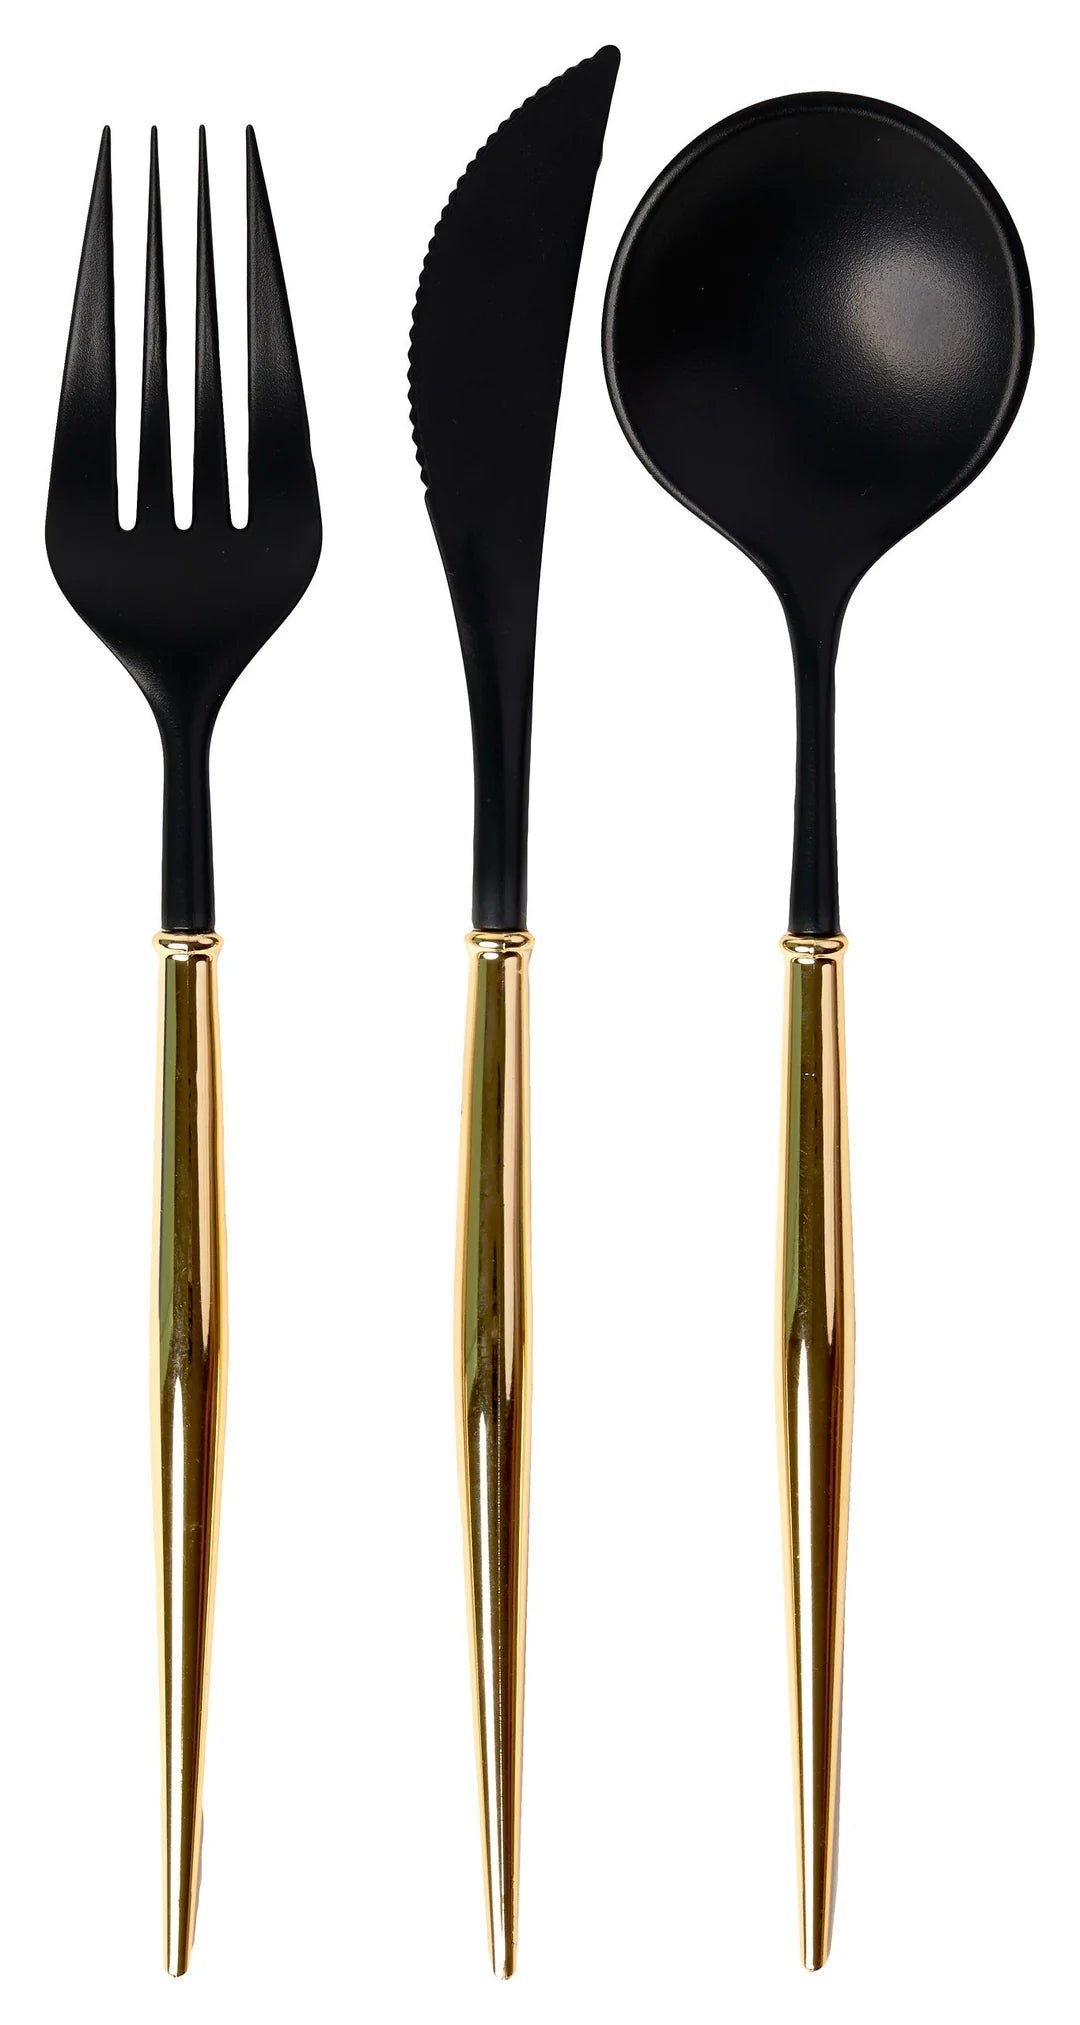 Black & Gold Assorted Plastic Cutlery Set/24 for 8 Place Settings